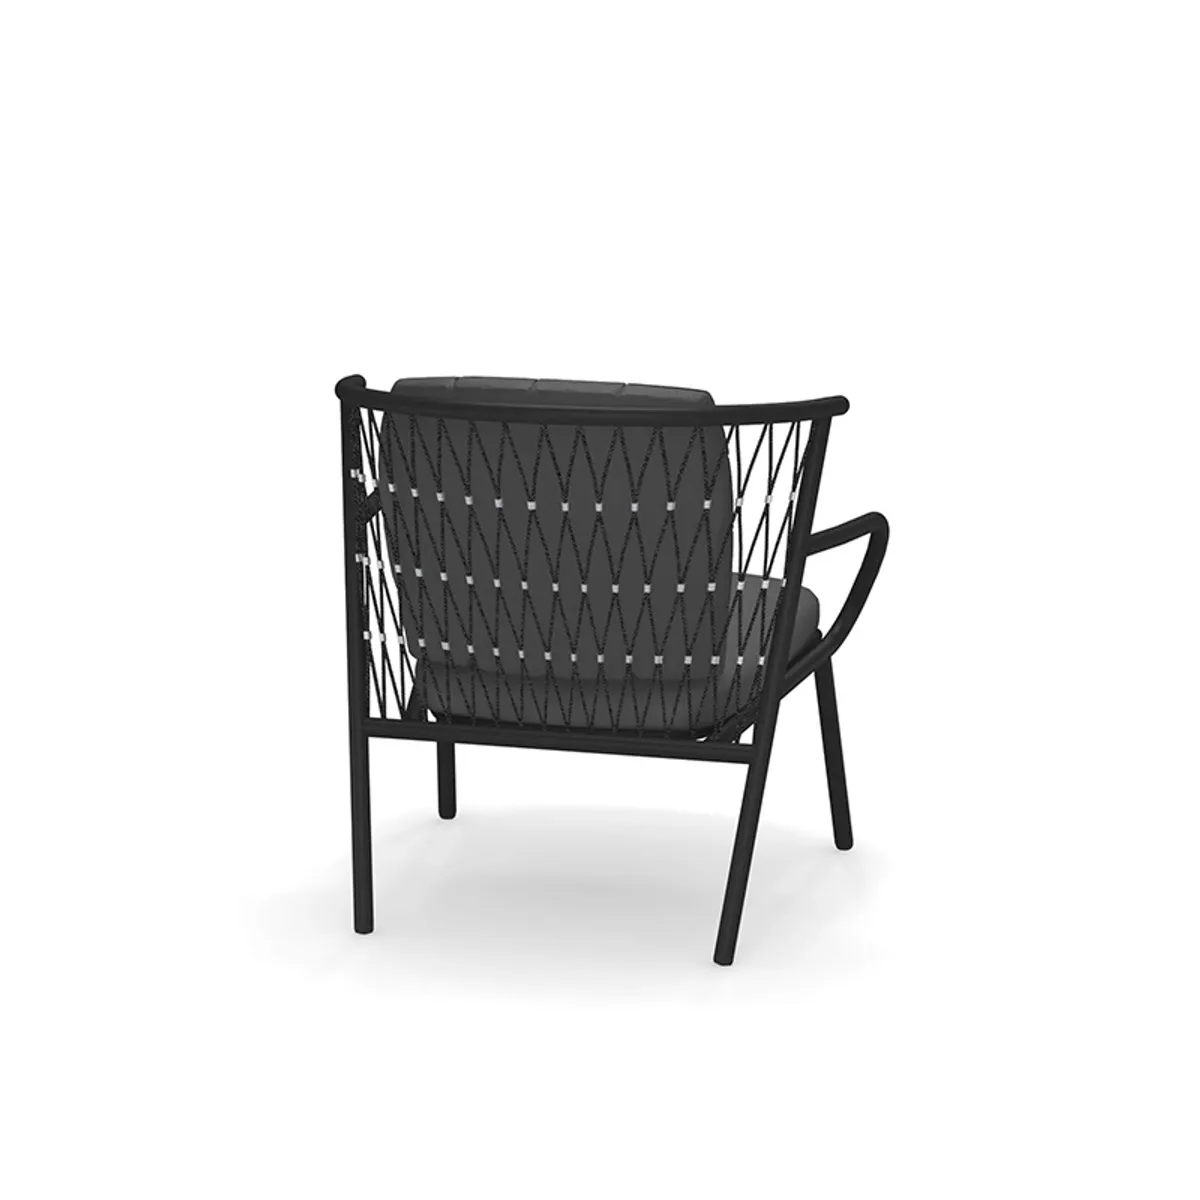 Nef Lounge Chair Outdoor Furniture By Insideoutcontracts 040